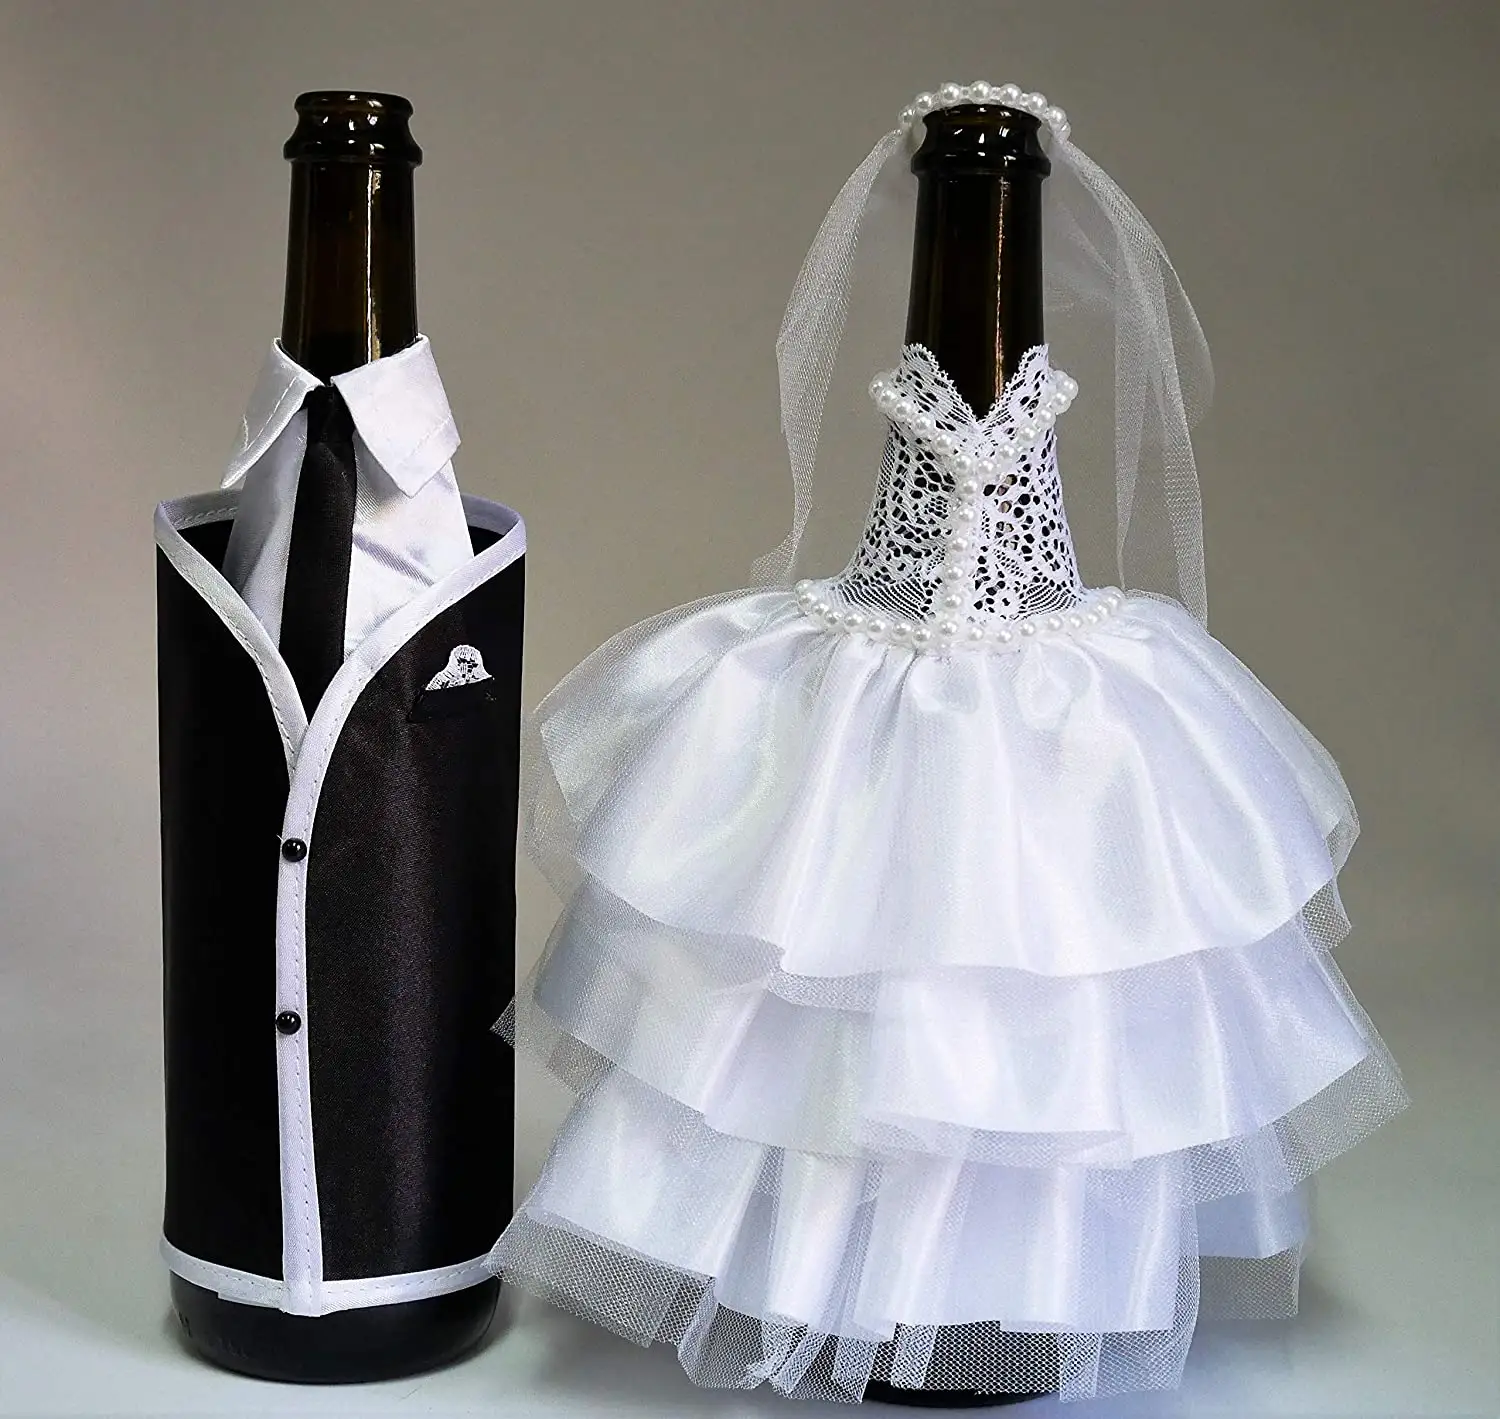 Bride and Groom Wine Bottle Cover Set Eco-friendly Non-toxic Fabric Wedding Wine Bottle Dress Up Best Couple Wedding Gifts